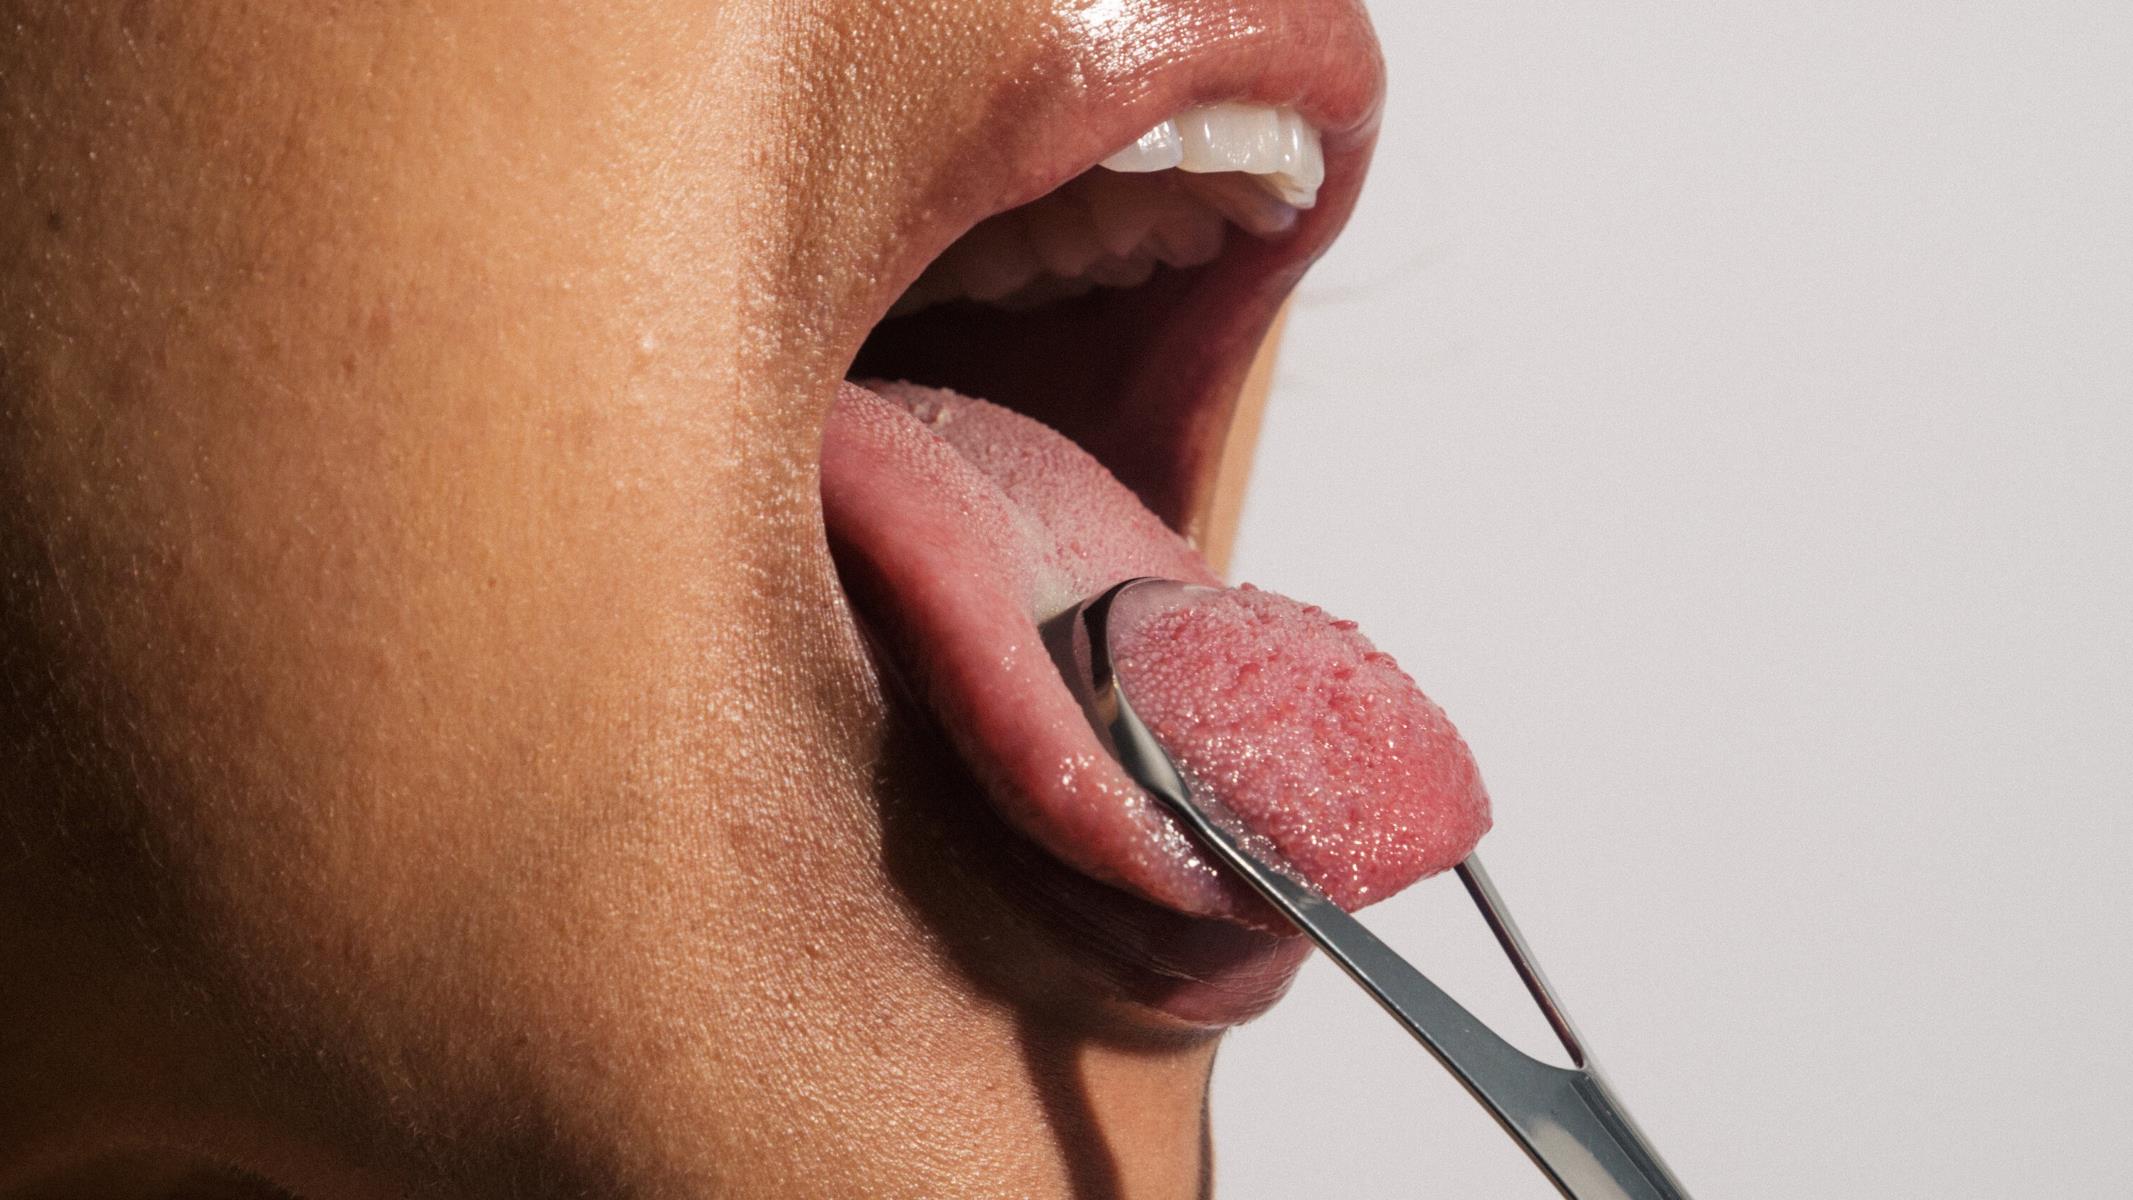 How To Properly Clean And Care For Your Tongue